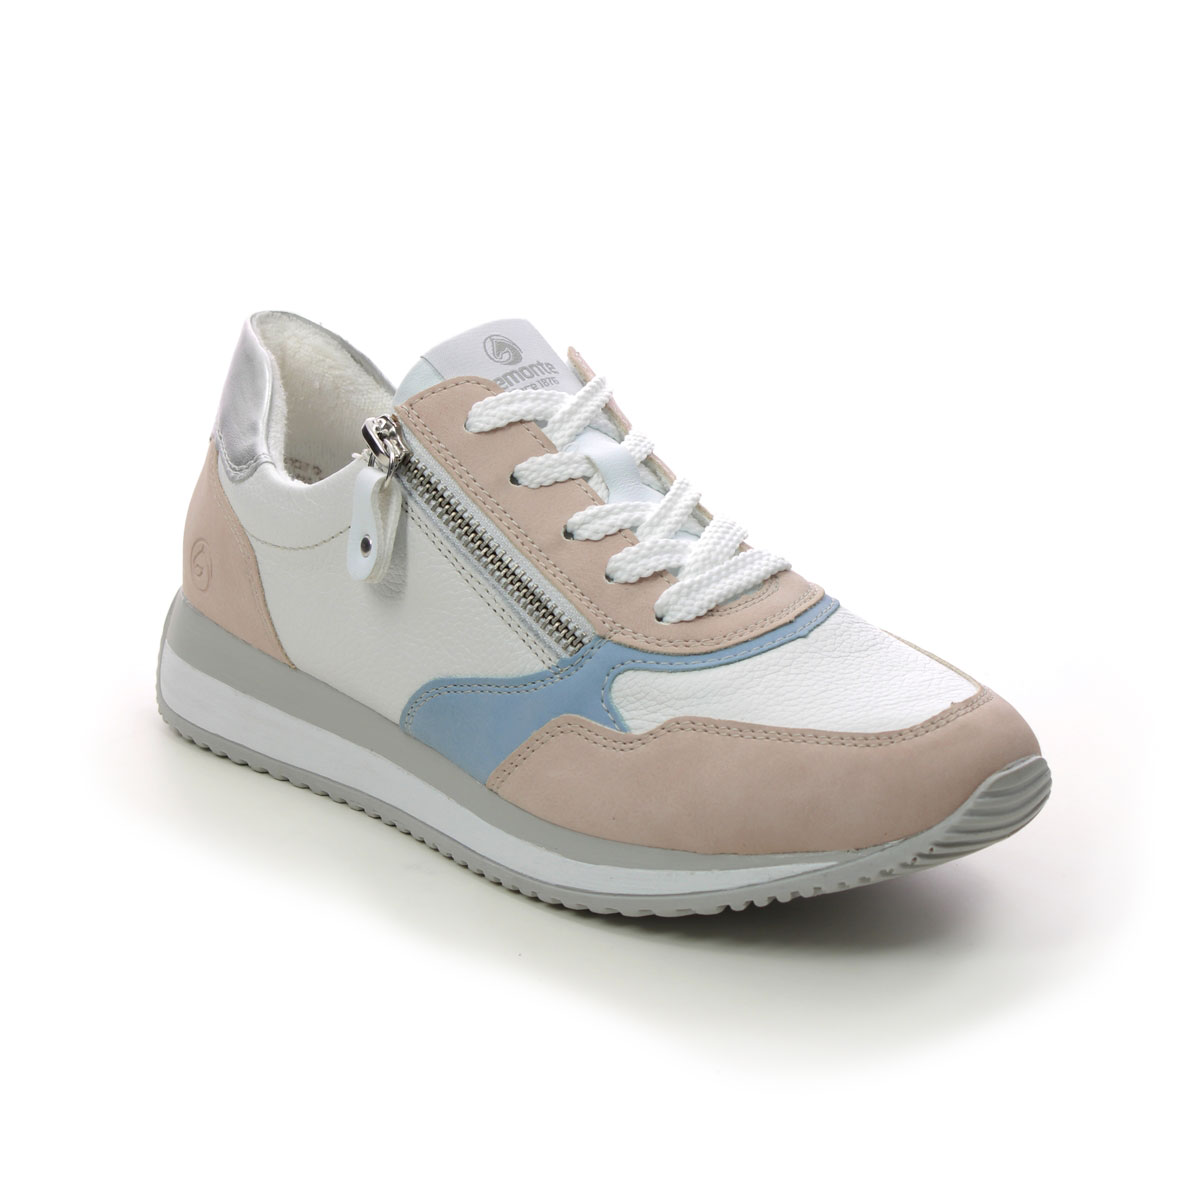 Remonte Vapod Zip White Blue Pink Womens Trainers D0H01-80 In Size 36 In Plain White Blue Pink